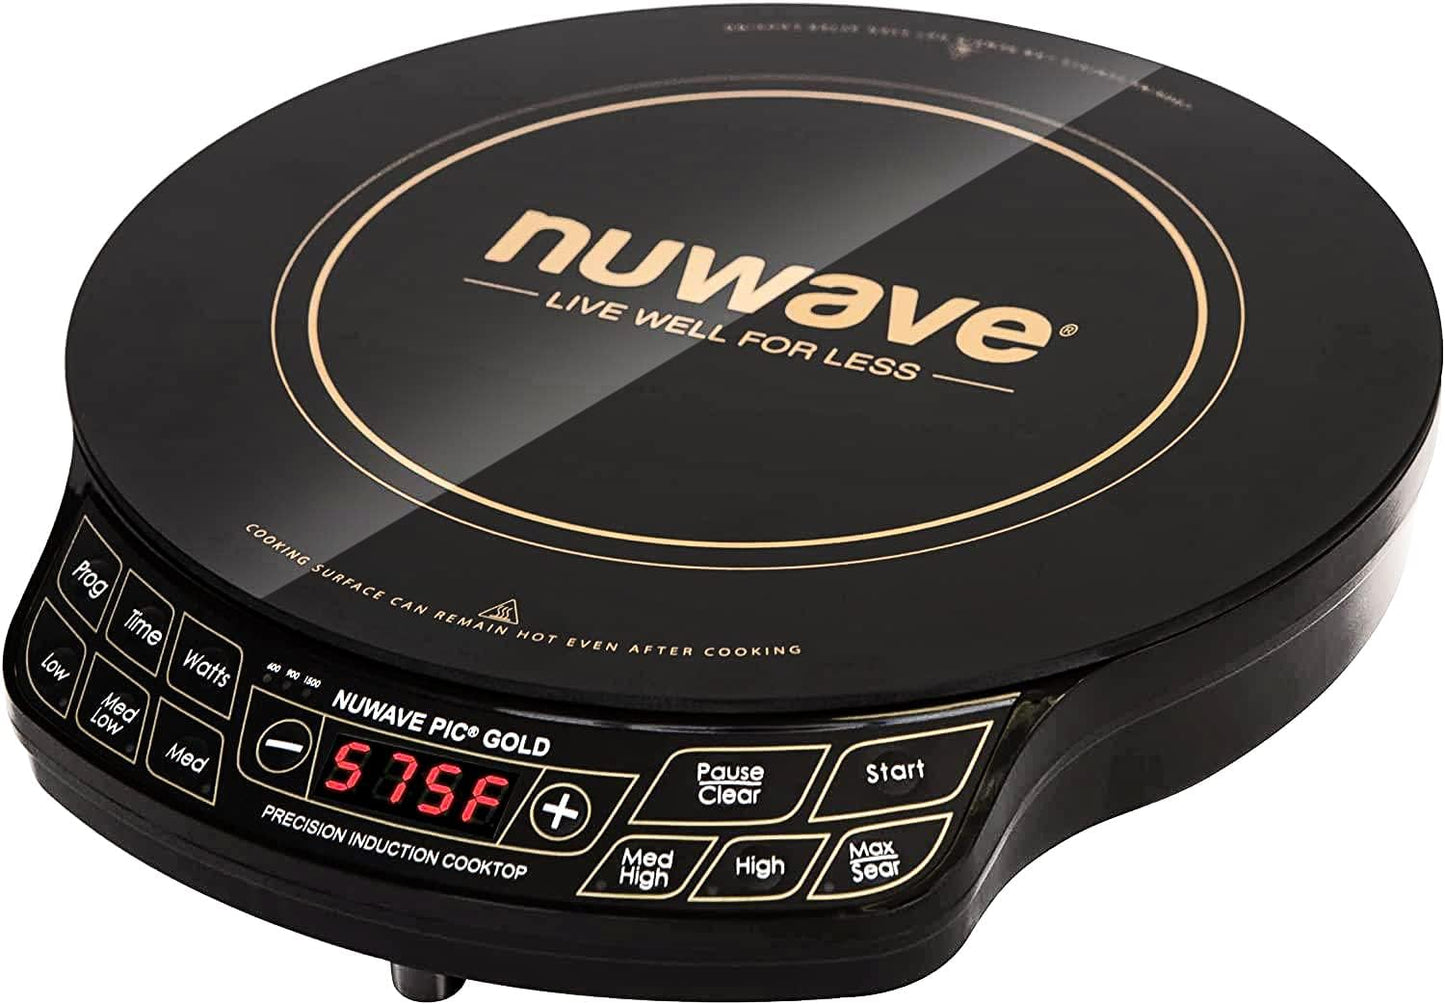 Nuwave Gold Precision Induction Cooktop, Portable, Powerful with Large 8” Heating Coil,100°F to 575°F, 3 Wattage Settings, 12” Heat-Resistant Cooking Surface